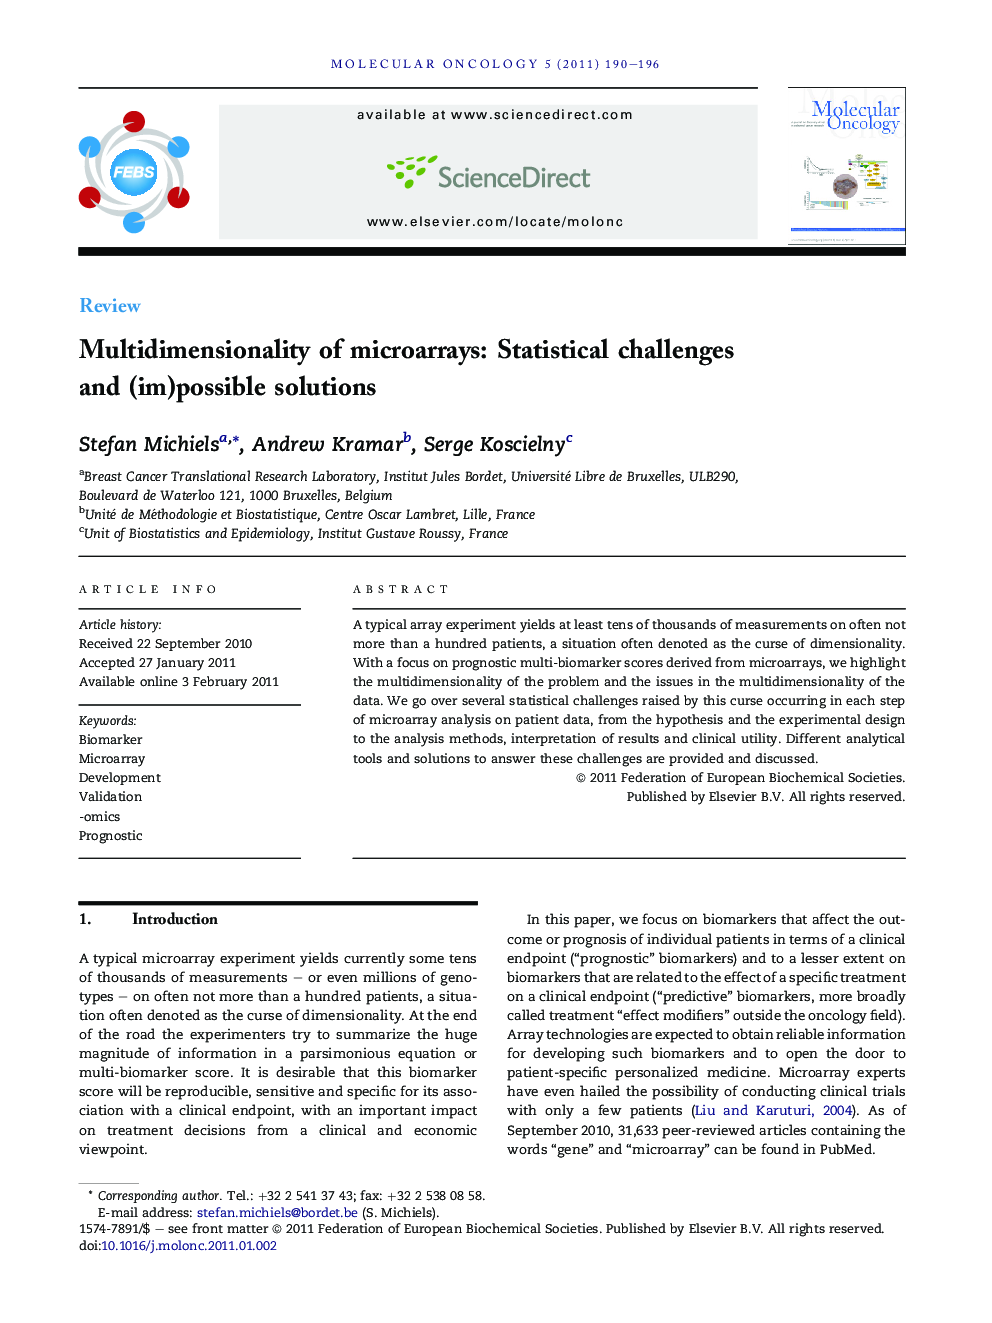 Multidimensionality of microarrays: Statistical challenges and (im)possible solutions